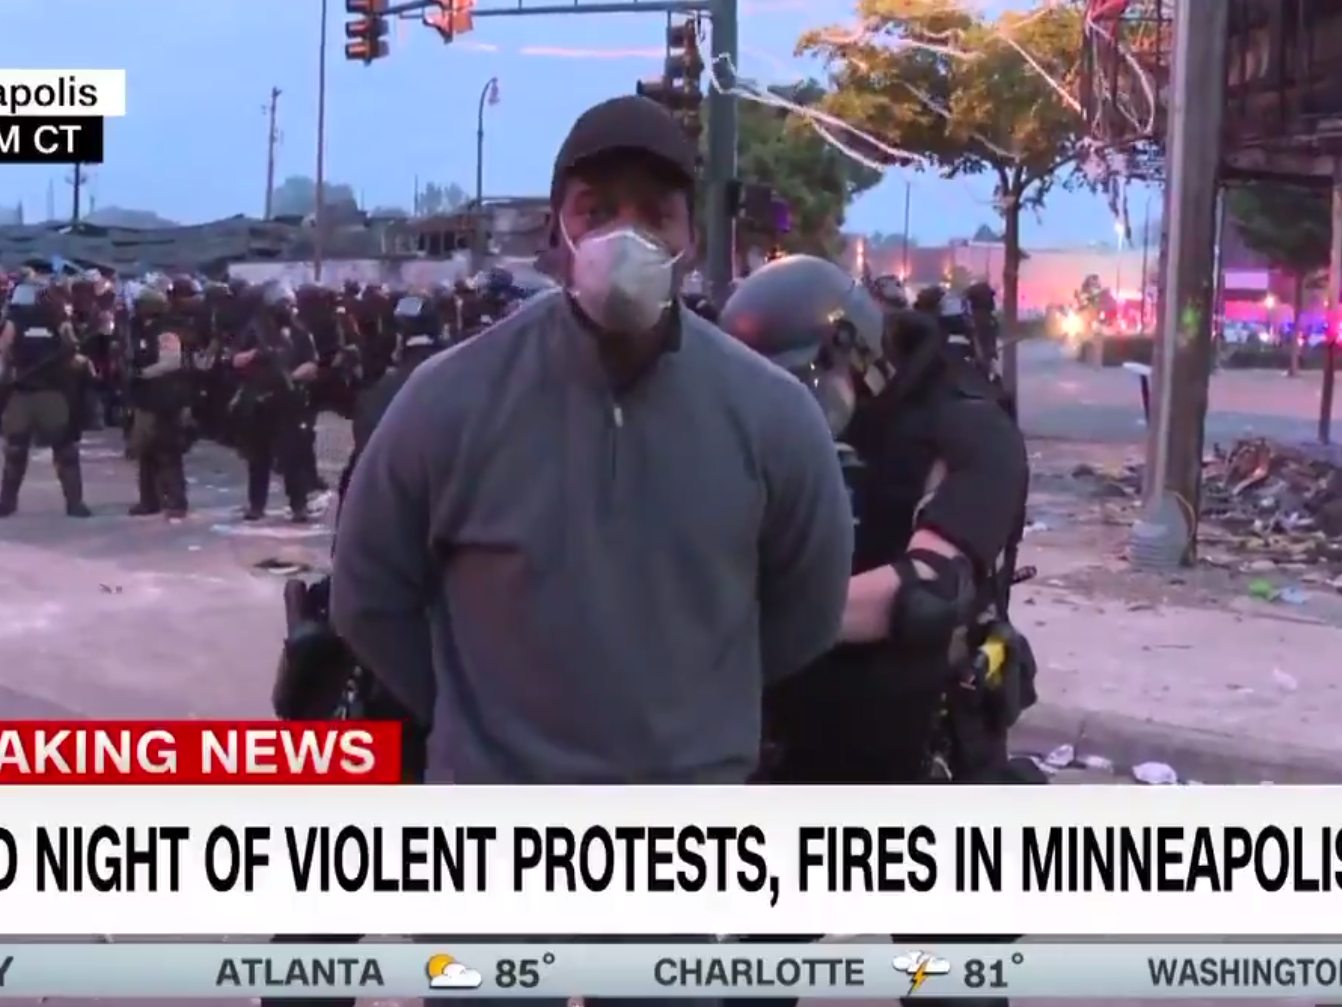 CNN journalist Omar Jimenez and his crew were arrested while reporting live on air in Minneapolis, and later released